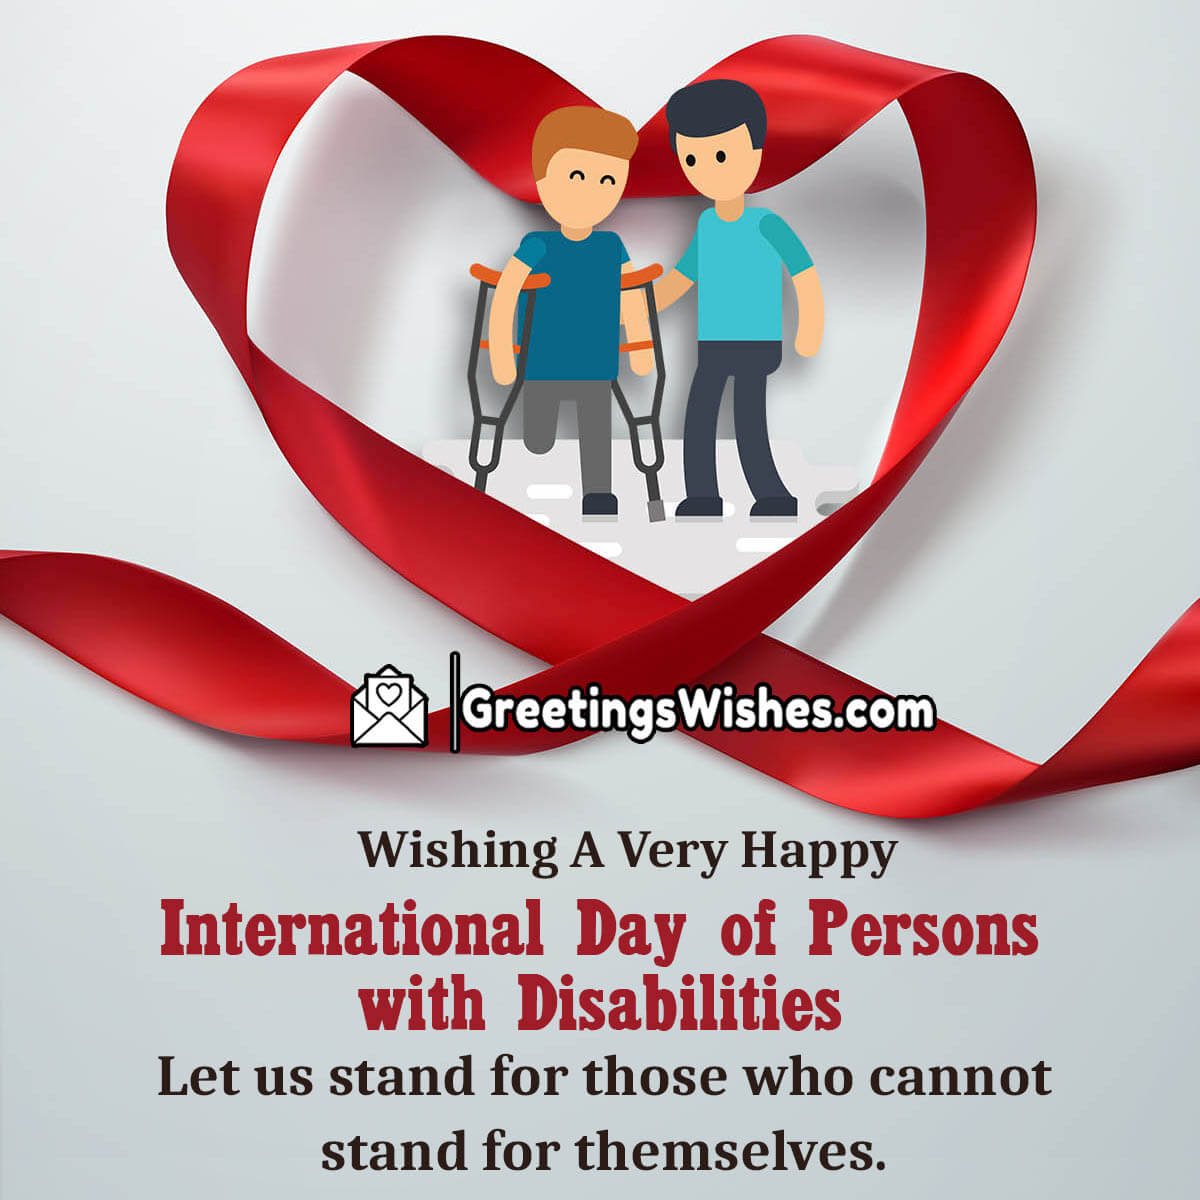 International Day Of Persons With Disabilities (3rd December)